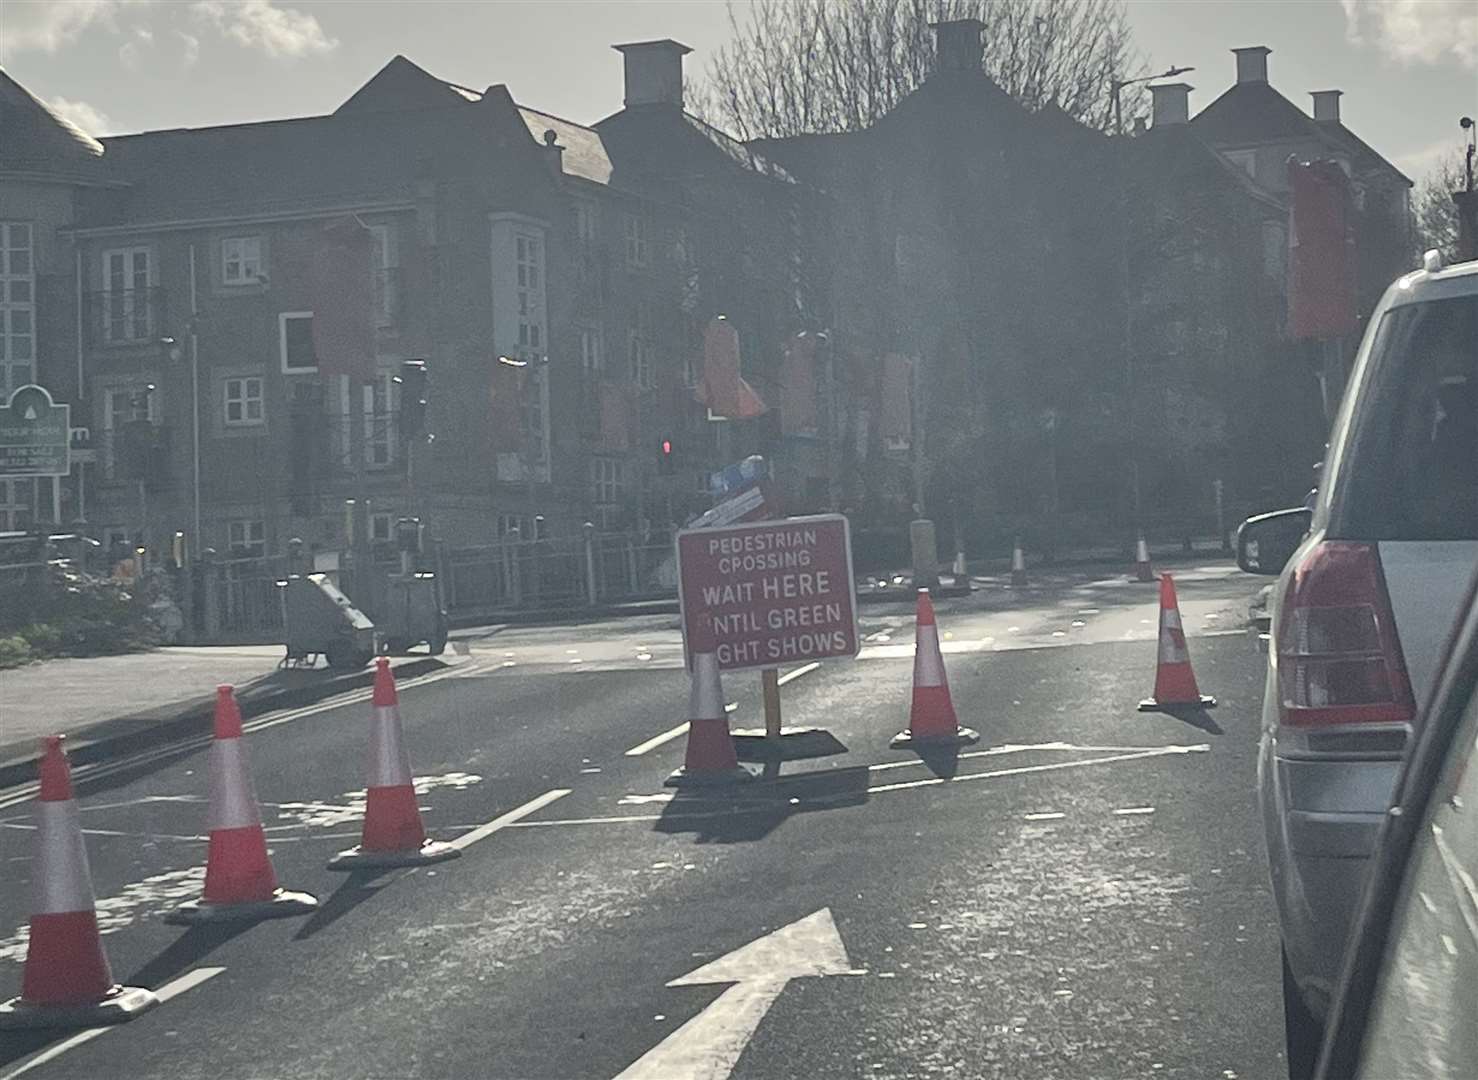 Thames Water had roadworks in two places along London Road, in Greenhithe